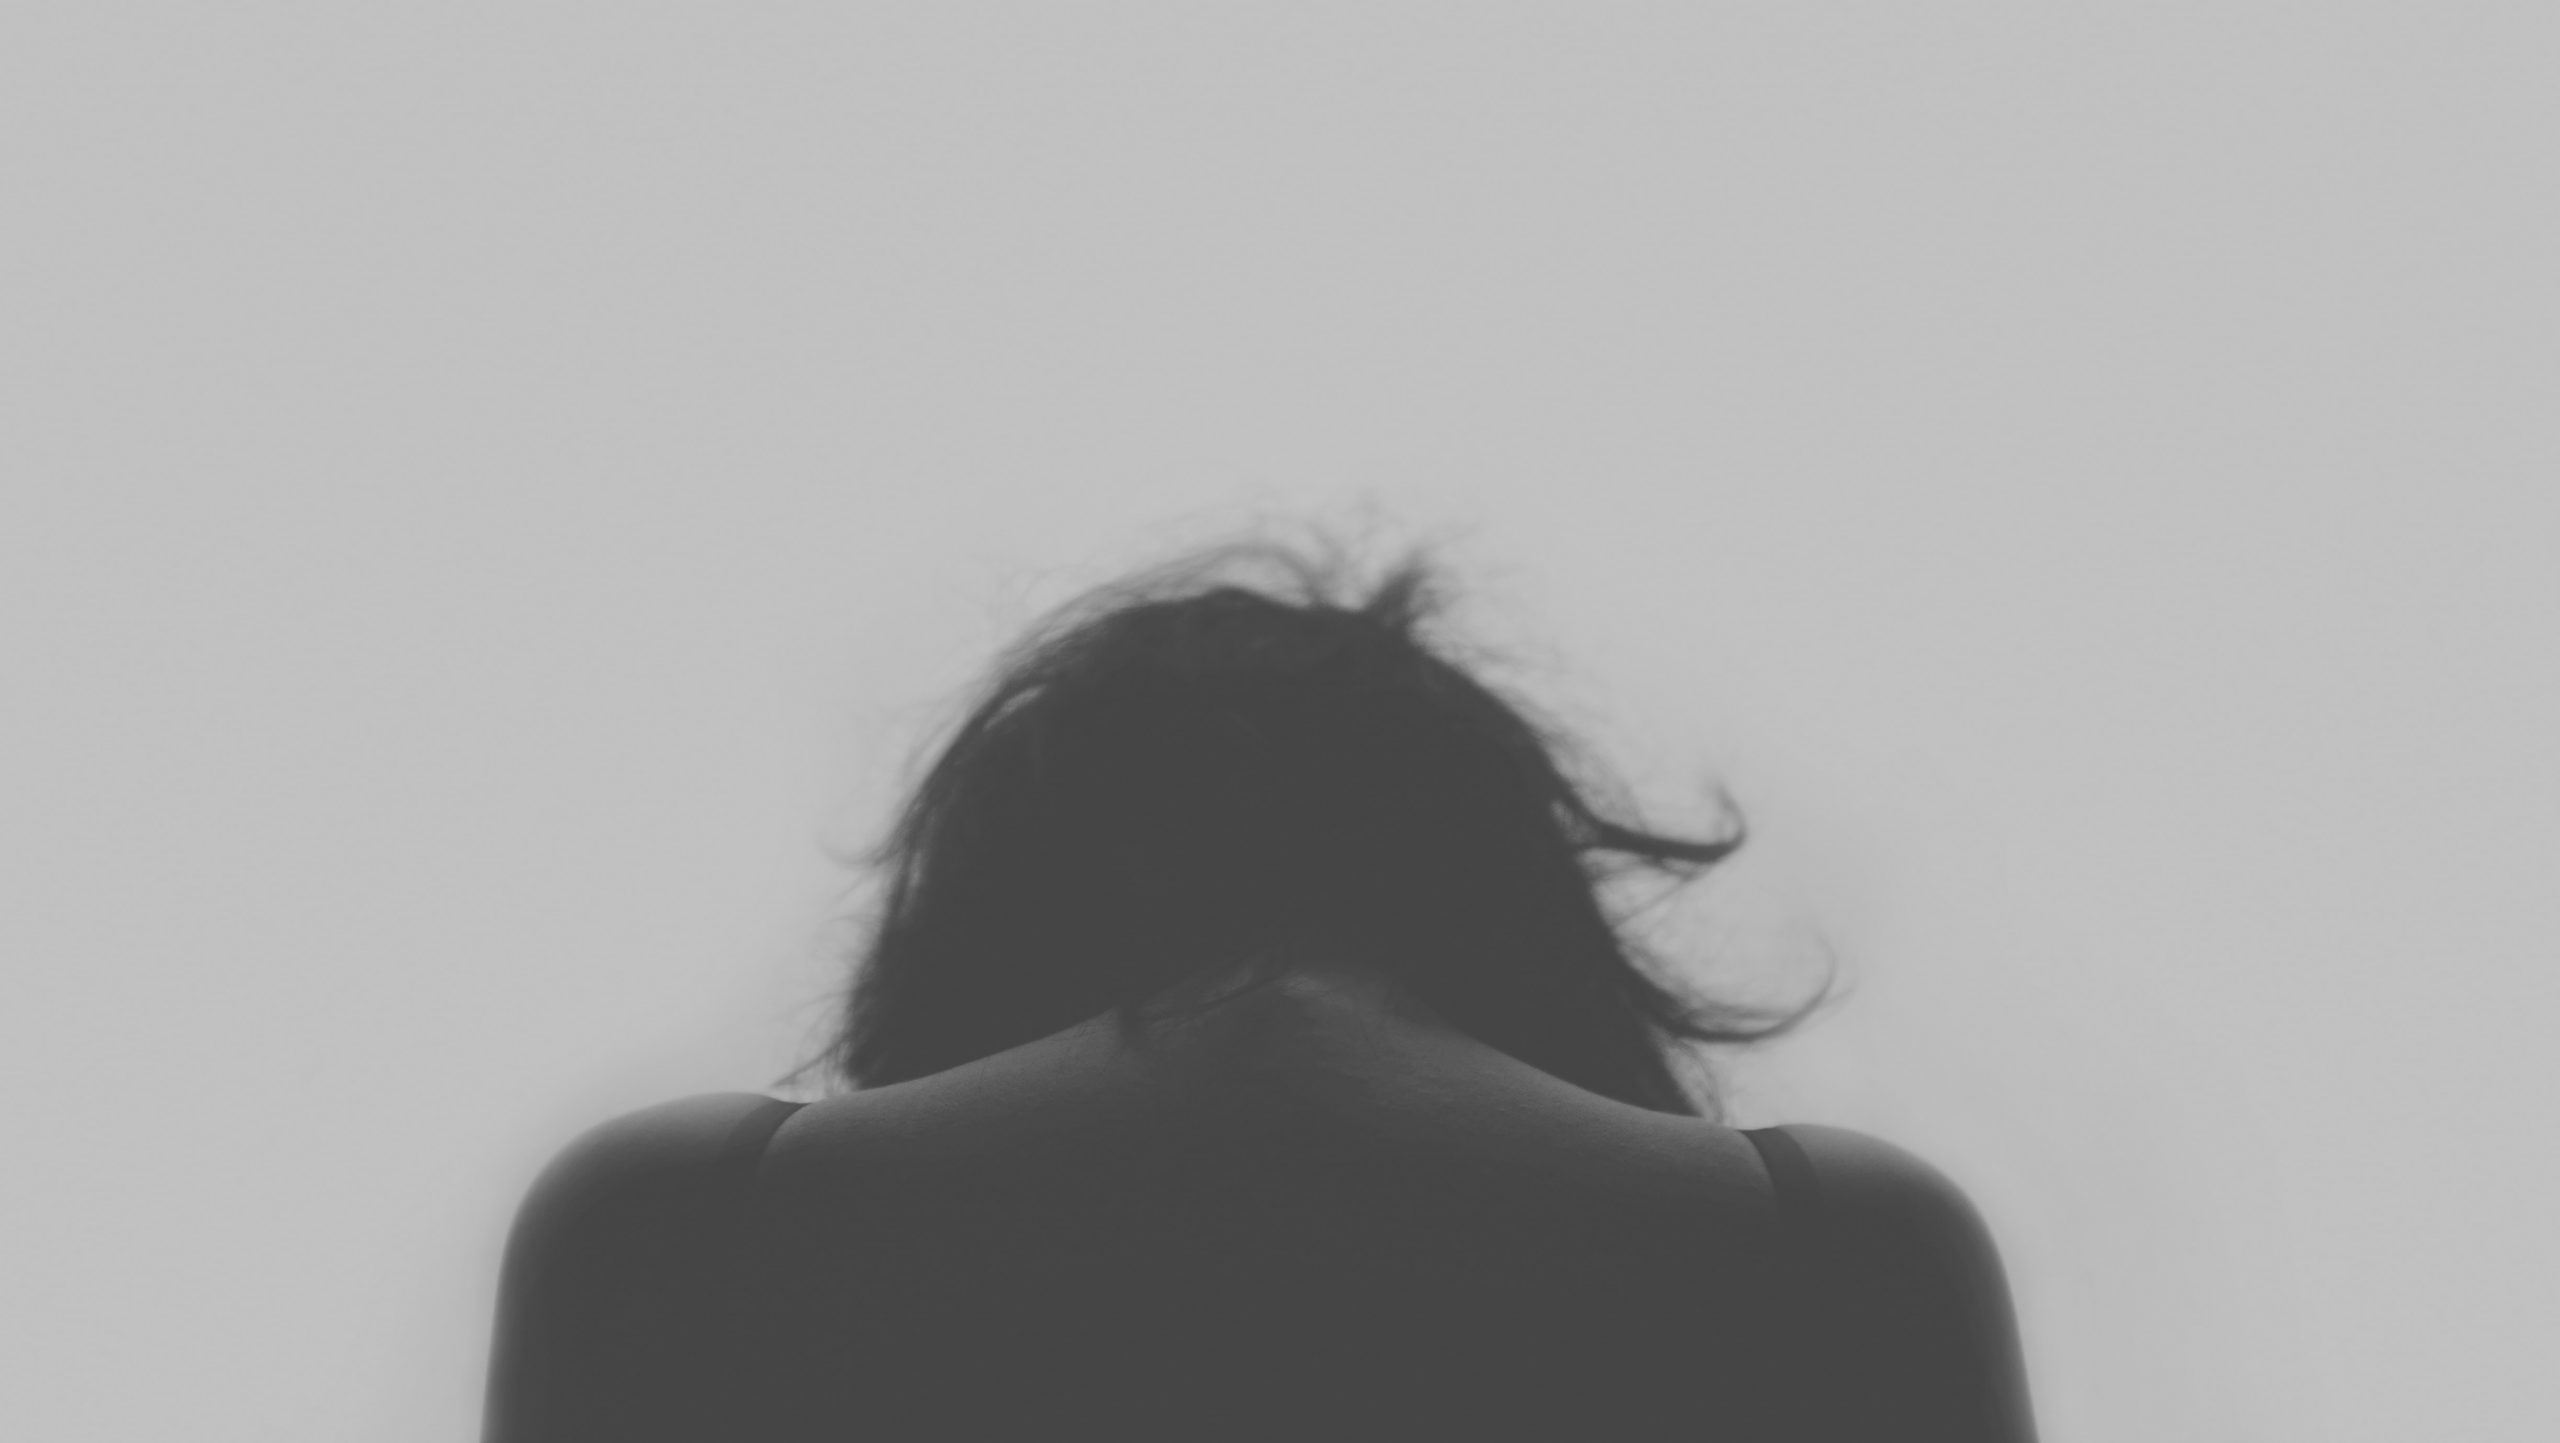 grayscale photo of person's back